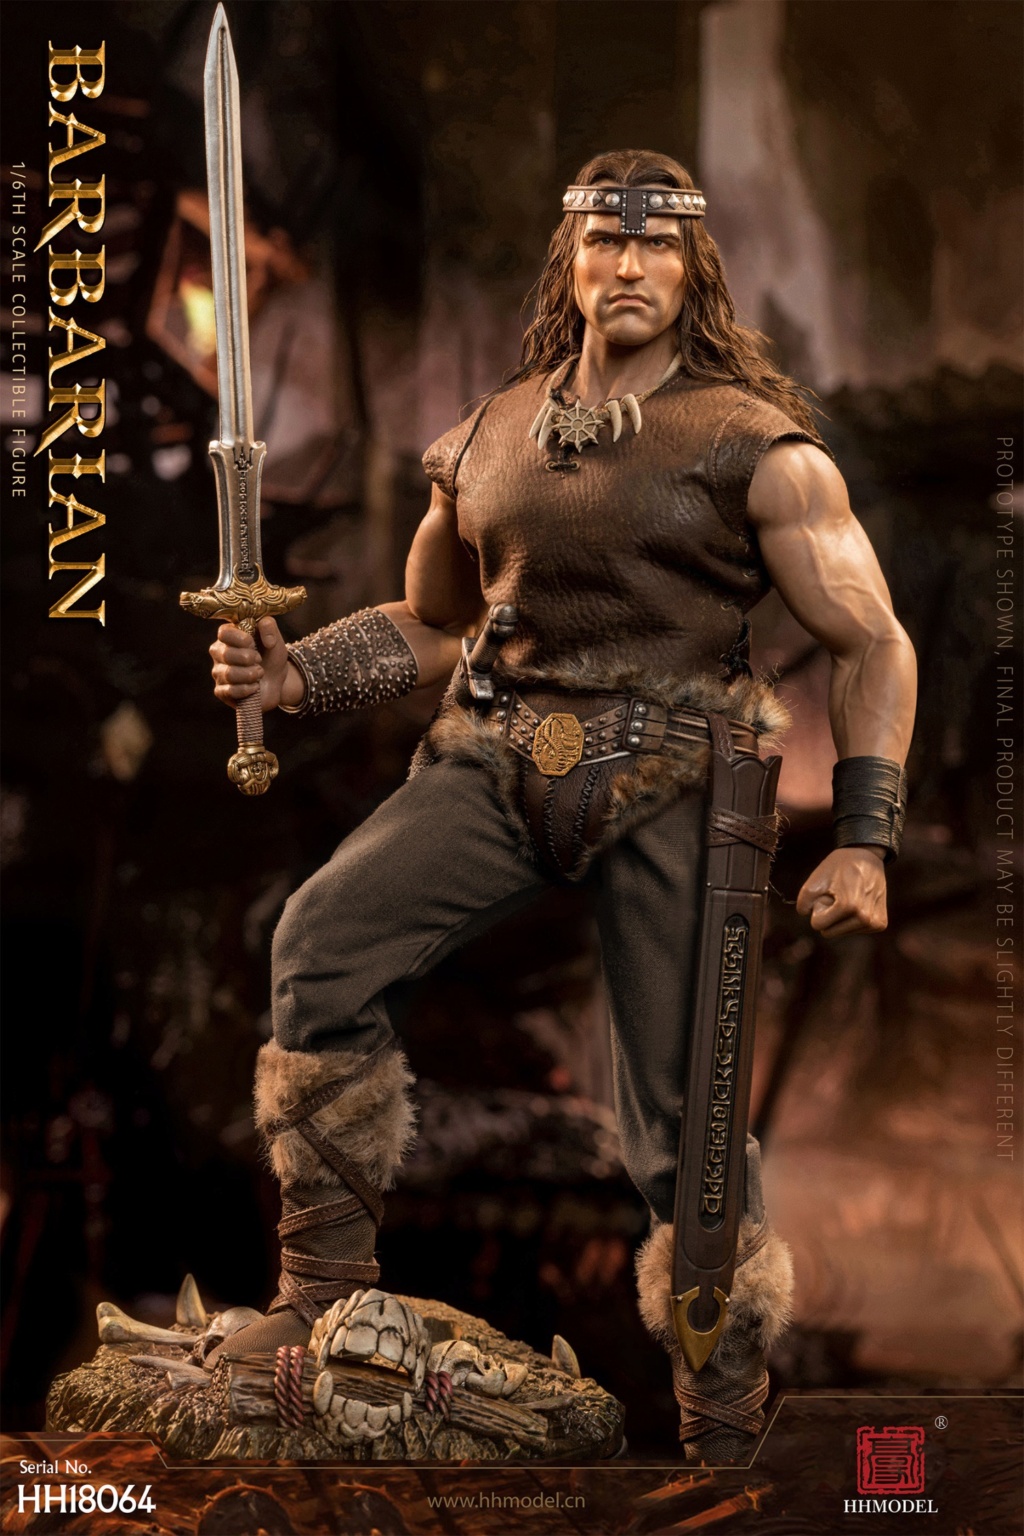 newproduct - NEW PRODUCT: Haoyutoys: HH18064 1/6 Scale The Barbarian 18000810